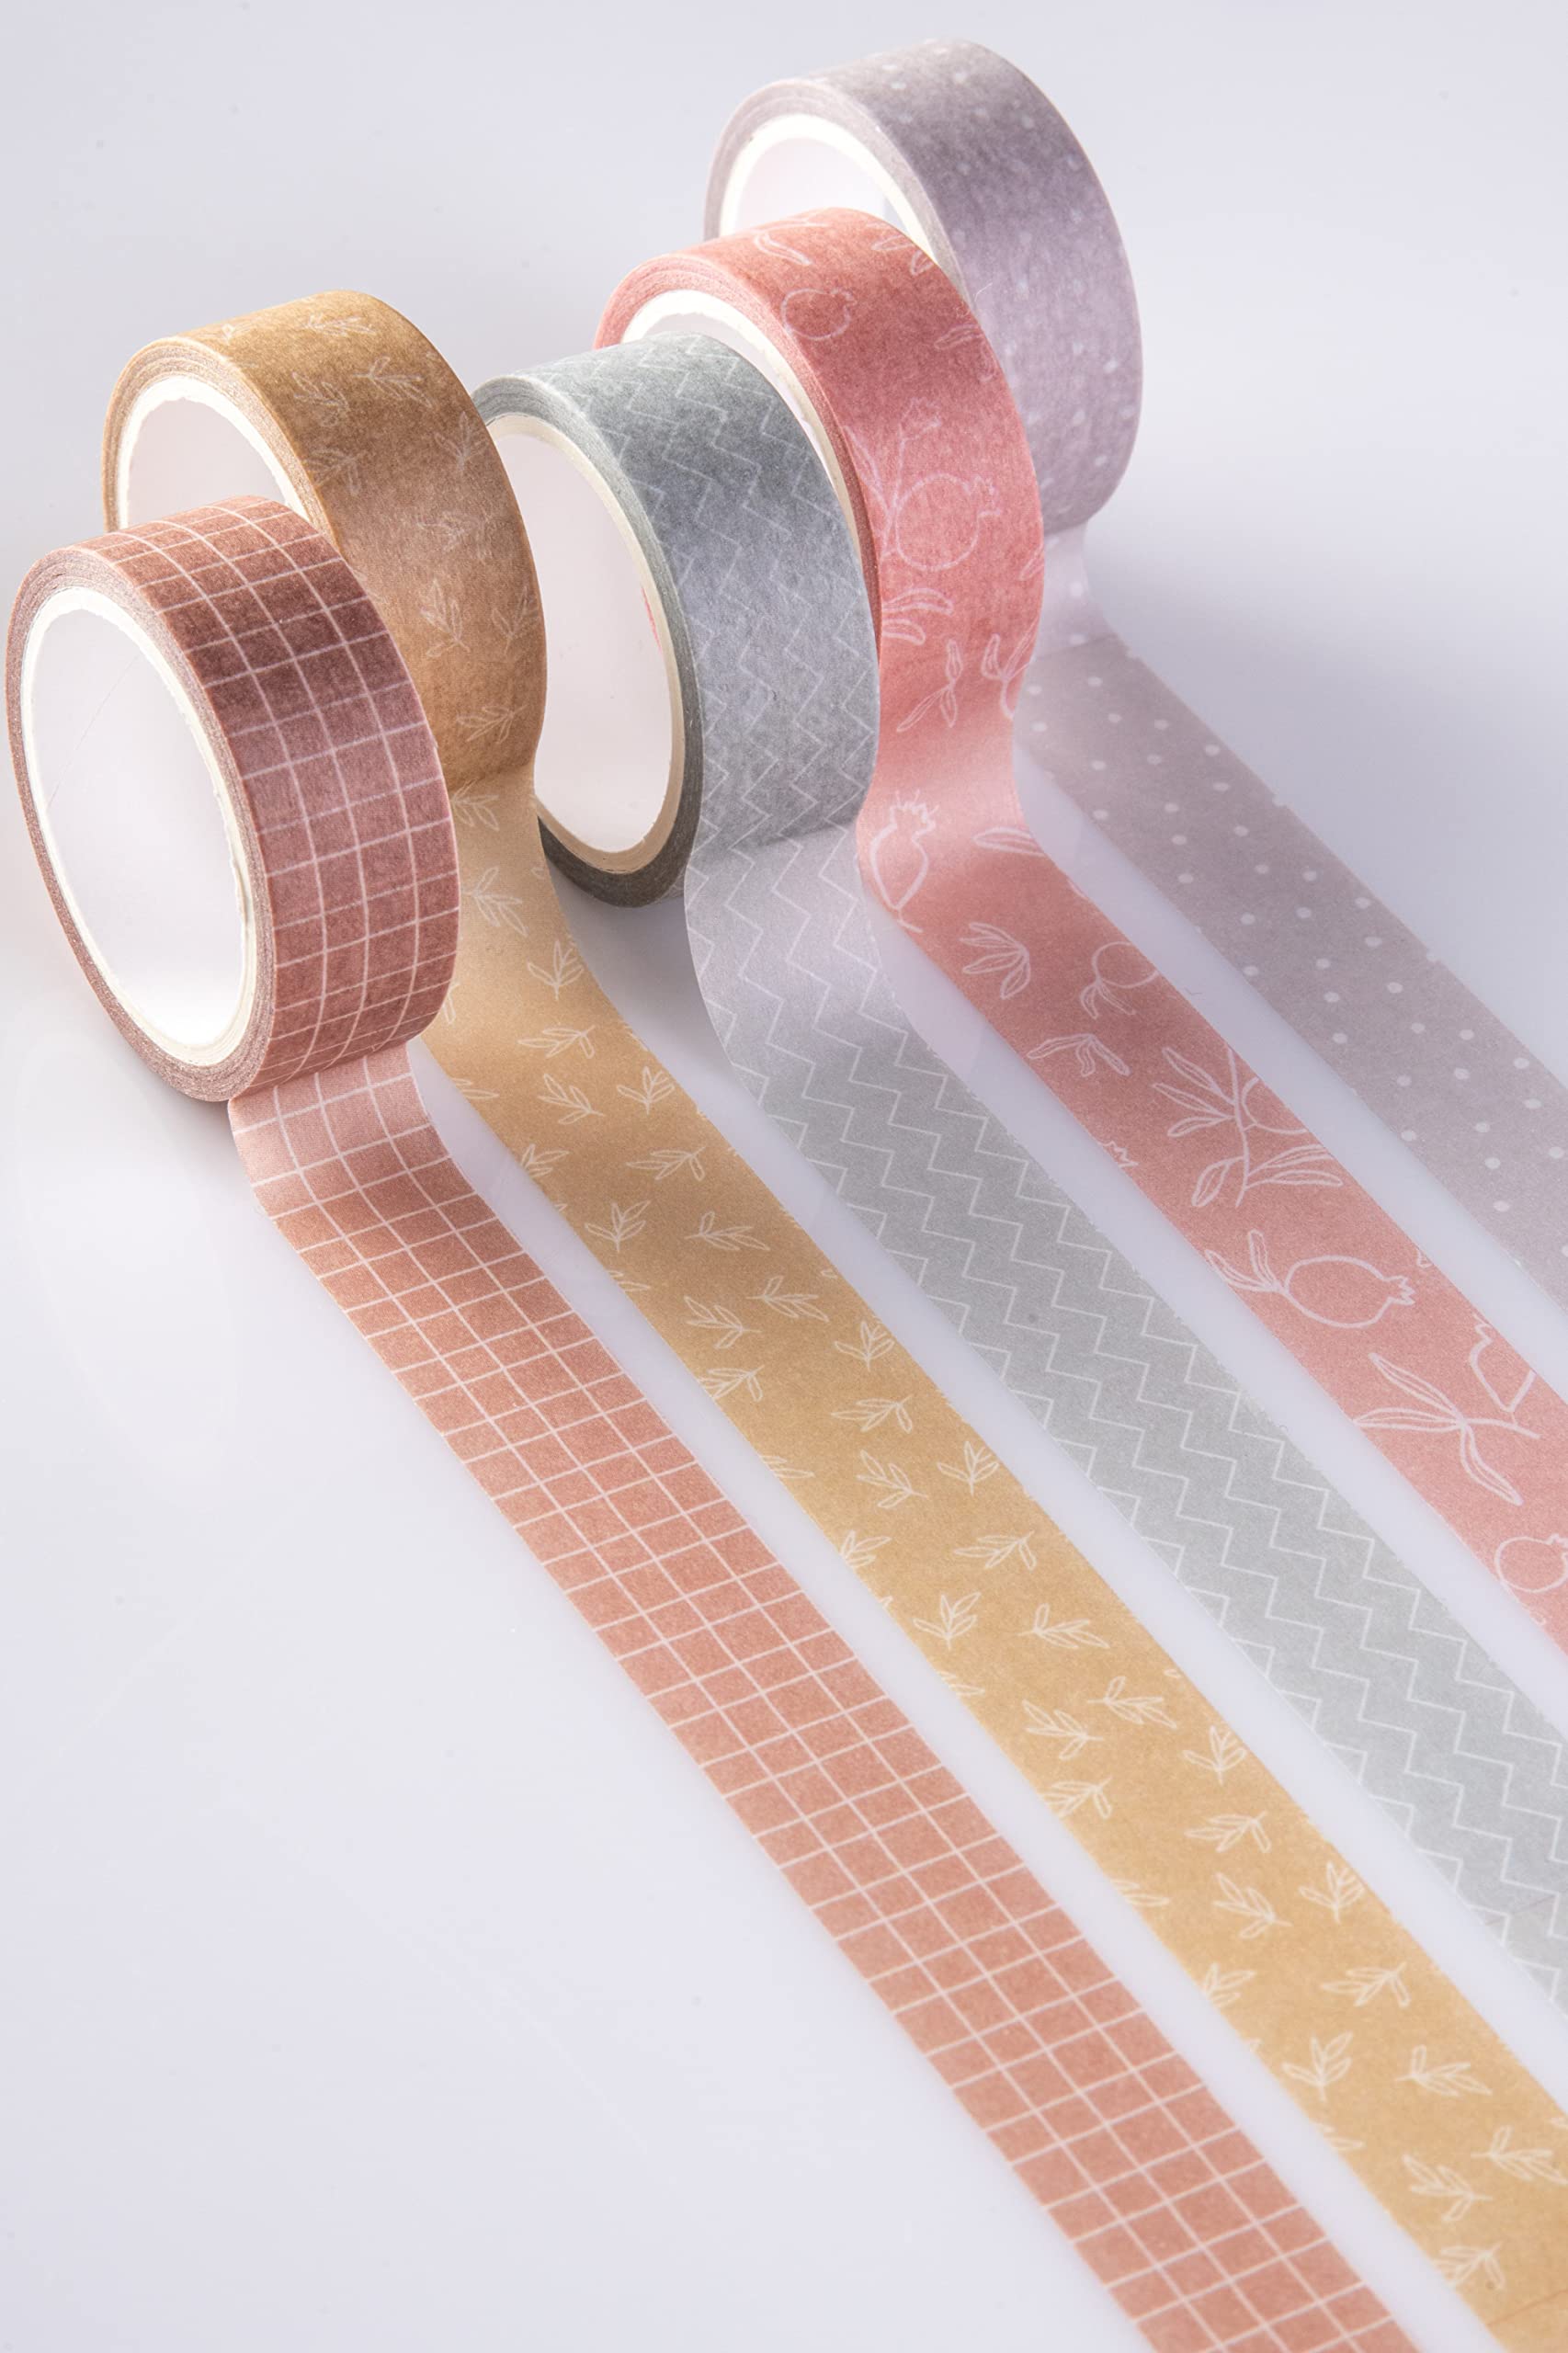  DIVERSEBEE Pastel Washi Tape Set, 5 Rolls Decorative Scrapbook  Tape, Cute Craft Tape, Scrapbooking Bullet Journal Supplies, Bible  Journaling, Planner Accessories, Gift Wrap Tape (Forest) : Arts, Crafts &  Sewing